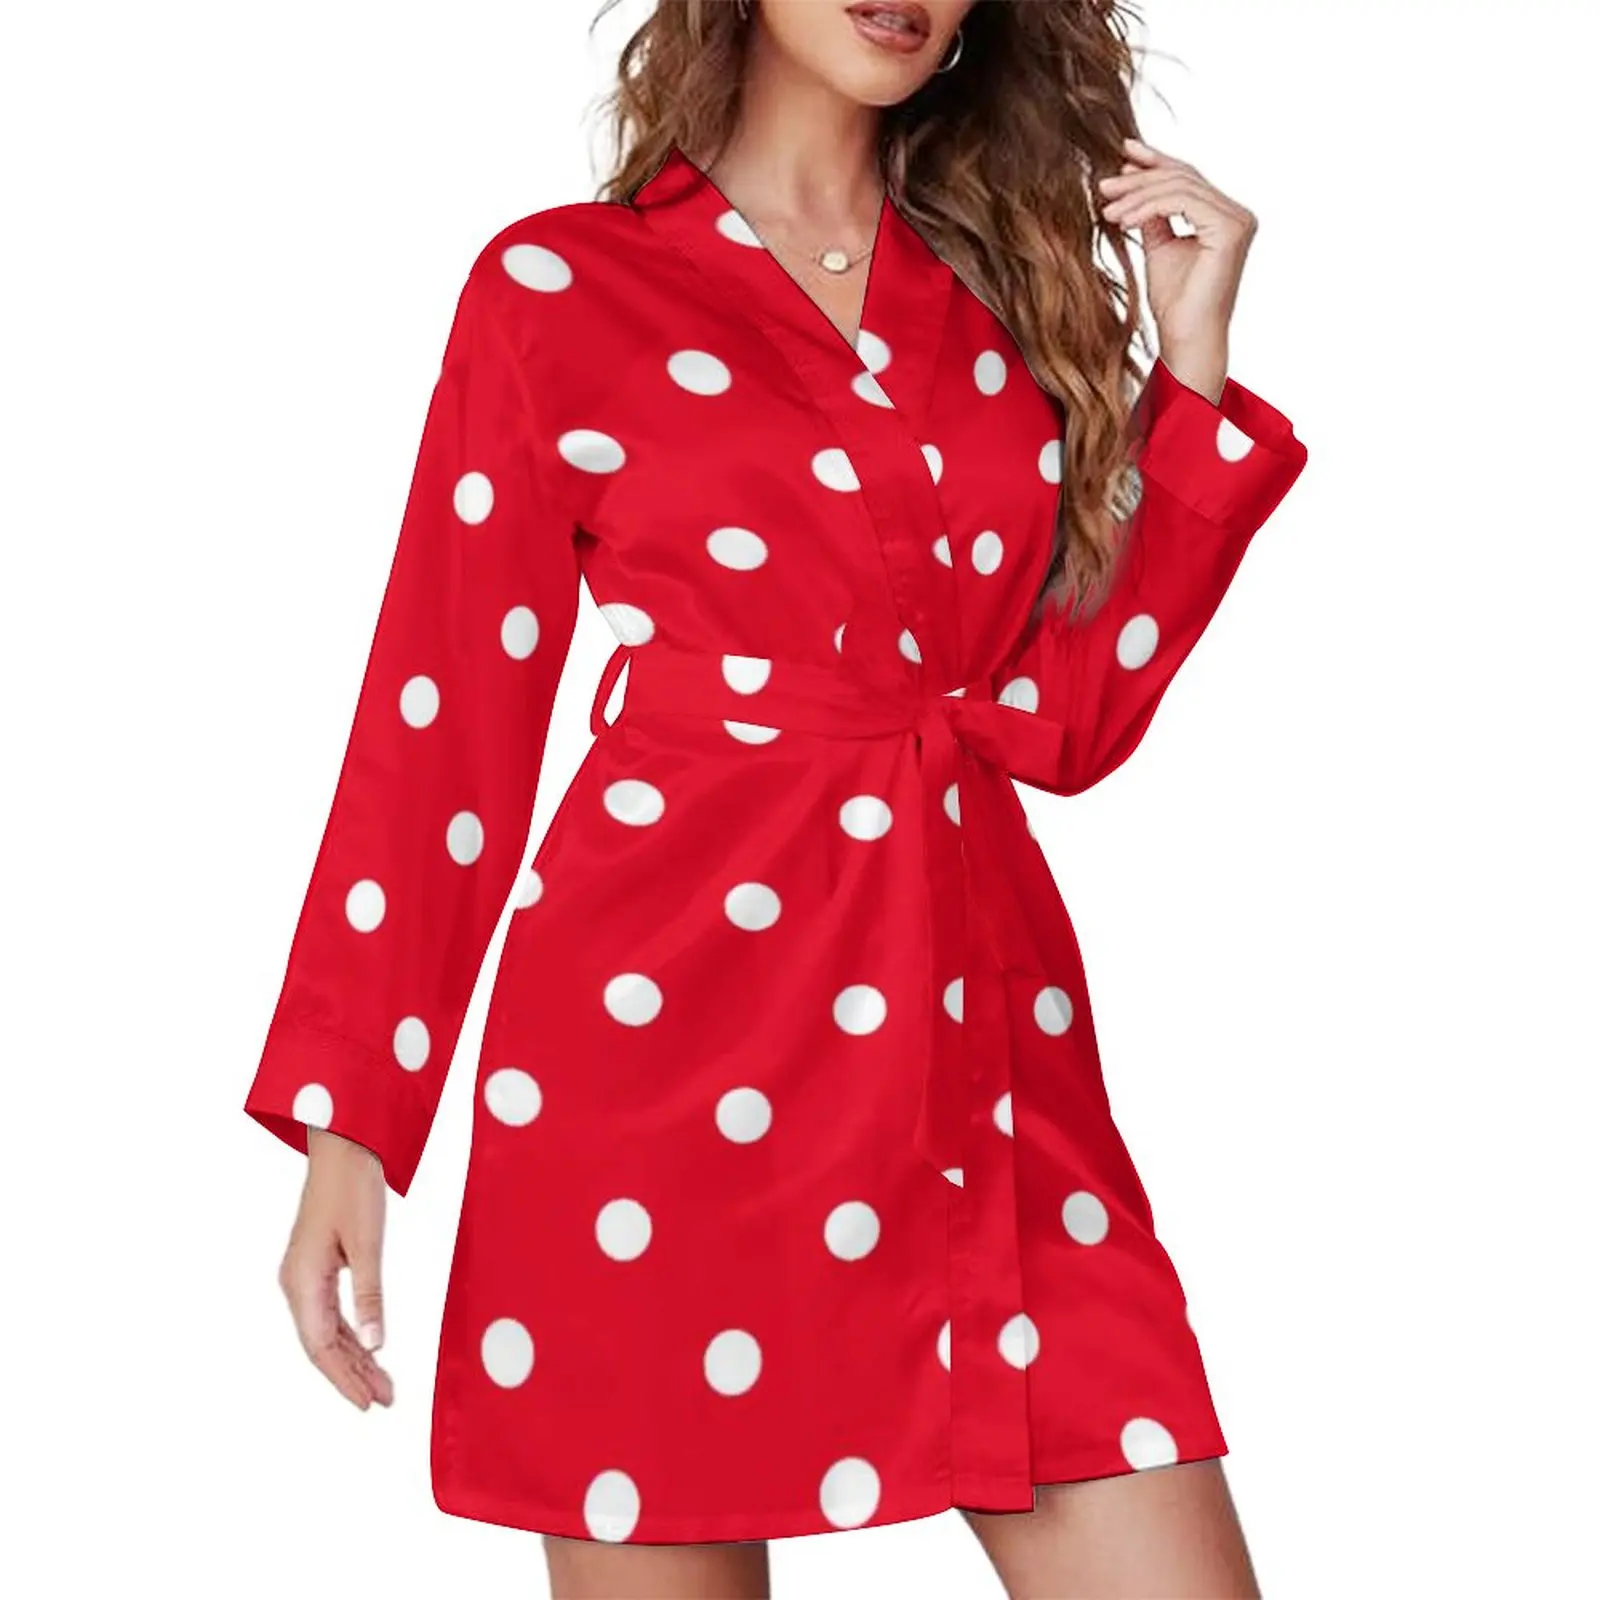 

Red with White Polka Dots Pajama Robe Lady Polka Dot Spotted Circles Bedroom Nightgown V Neck Graphic Pajamas Robes Warm Dresses